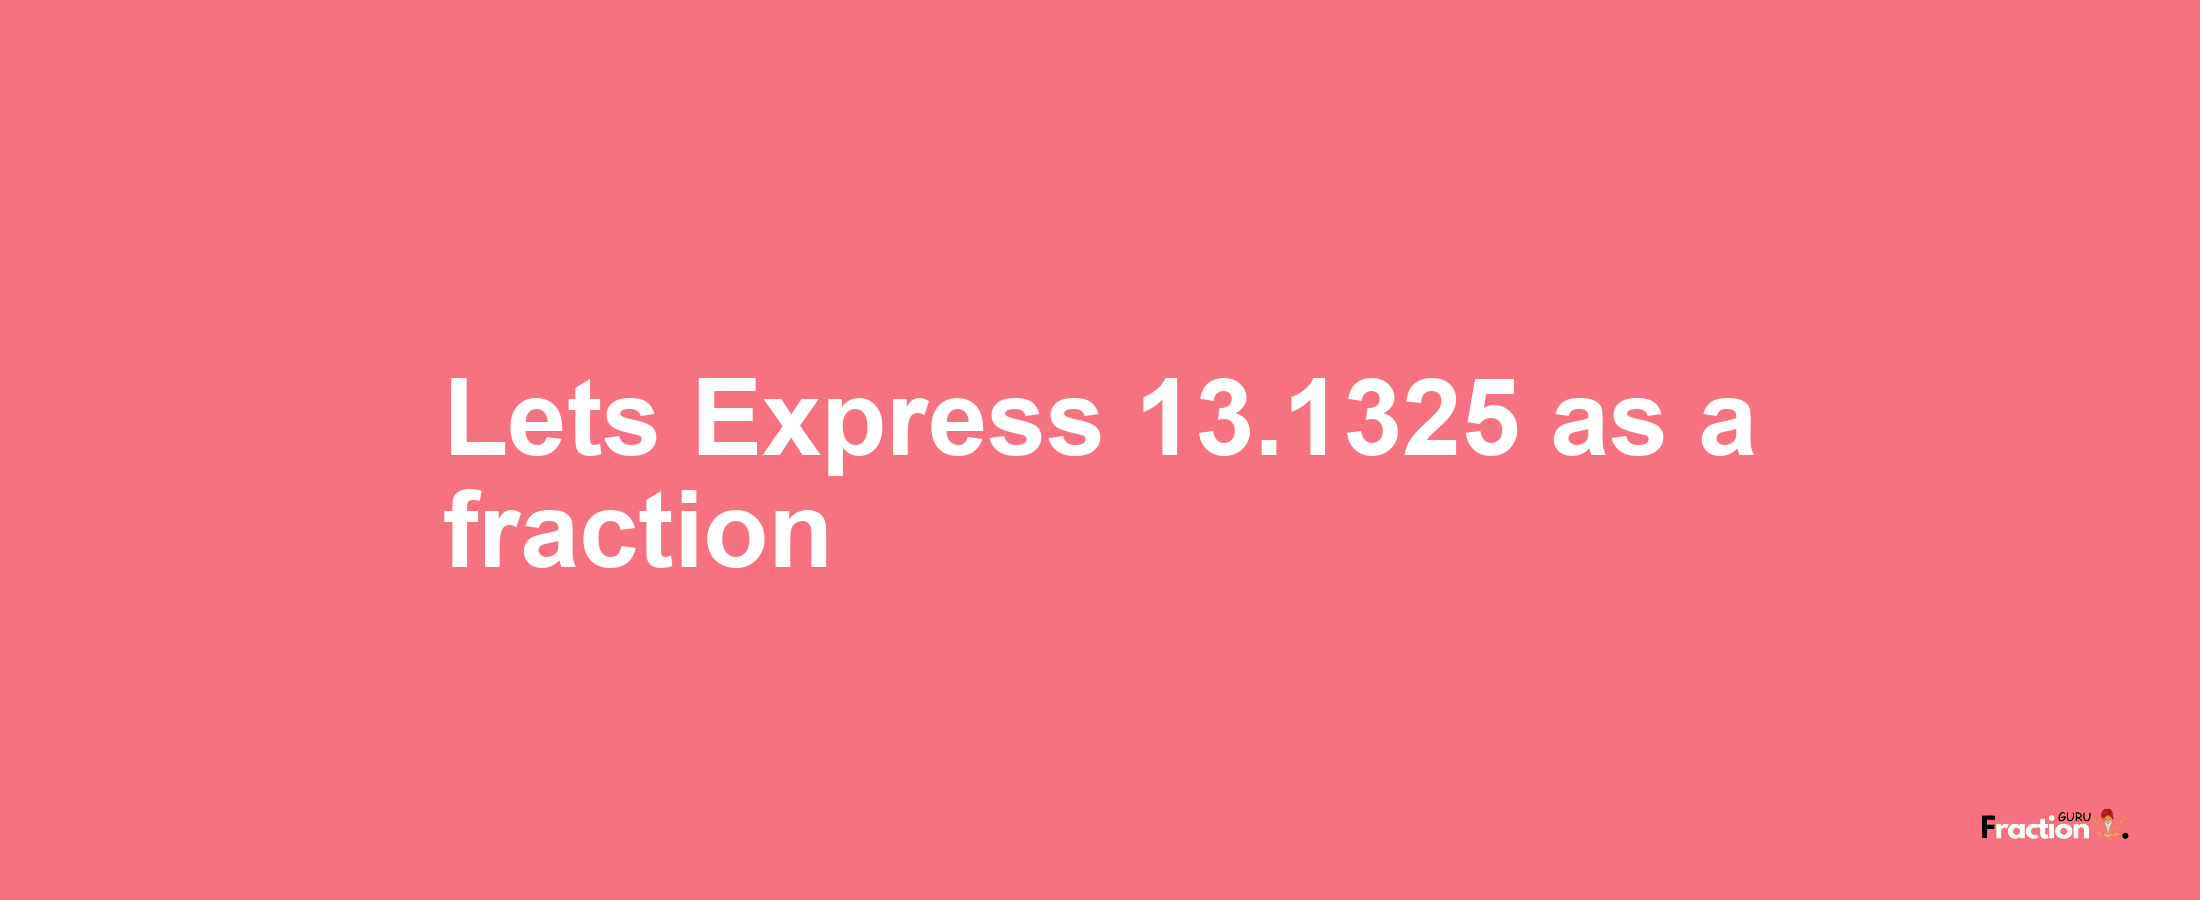 Lets Express 13.1325 as afraction